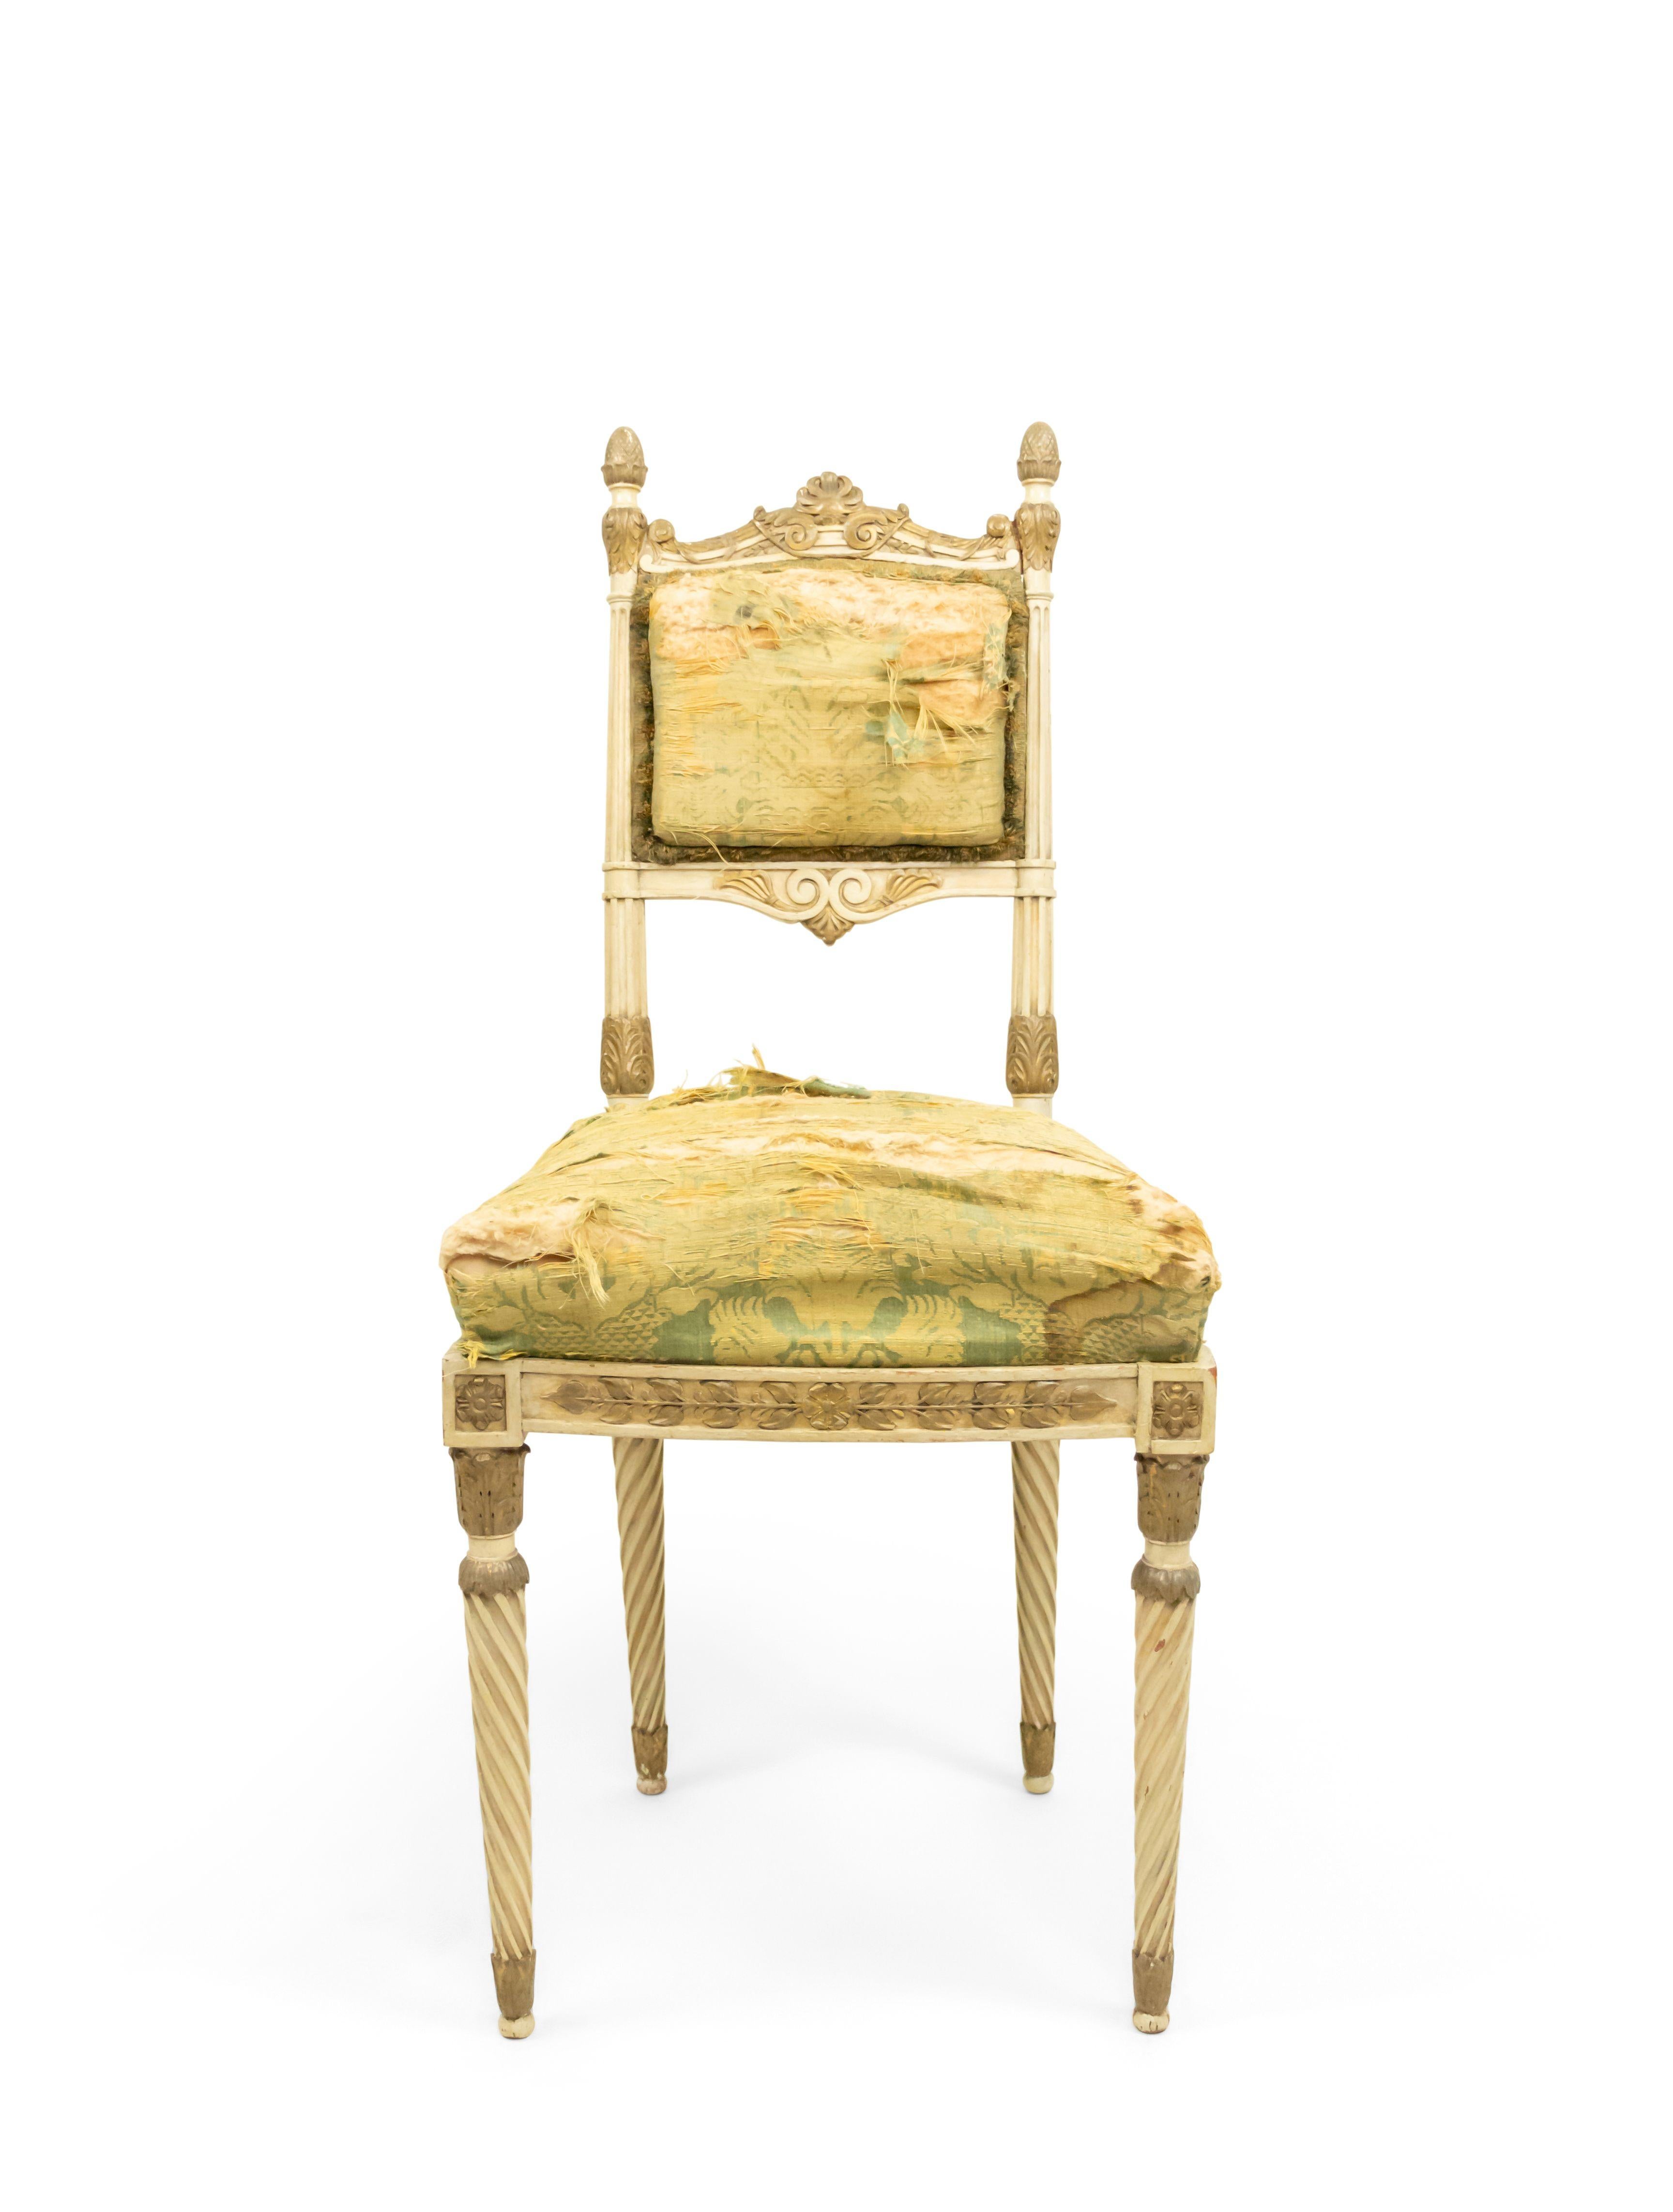 Set of 4 Italian Neoclassic style parcel gilt & cream painted side chairs with green damask silk upholstery above spiral fluted turned legs (19th Cent)
